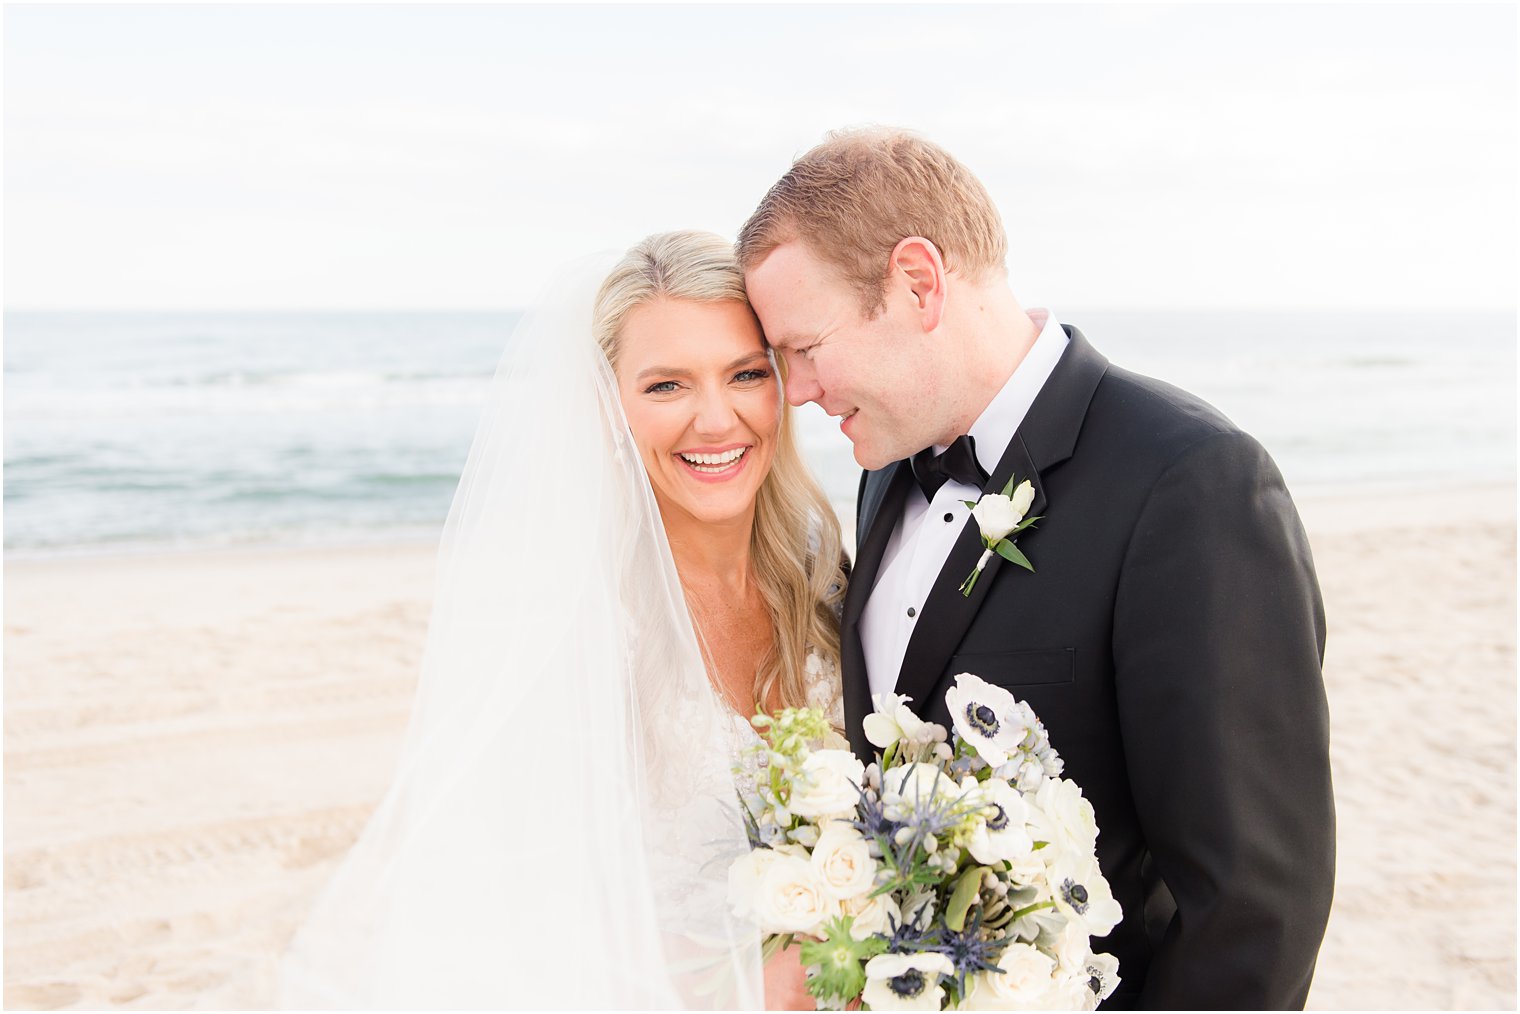 groom nuzzles bride's cheek on beach laughing on wedding day 